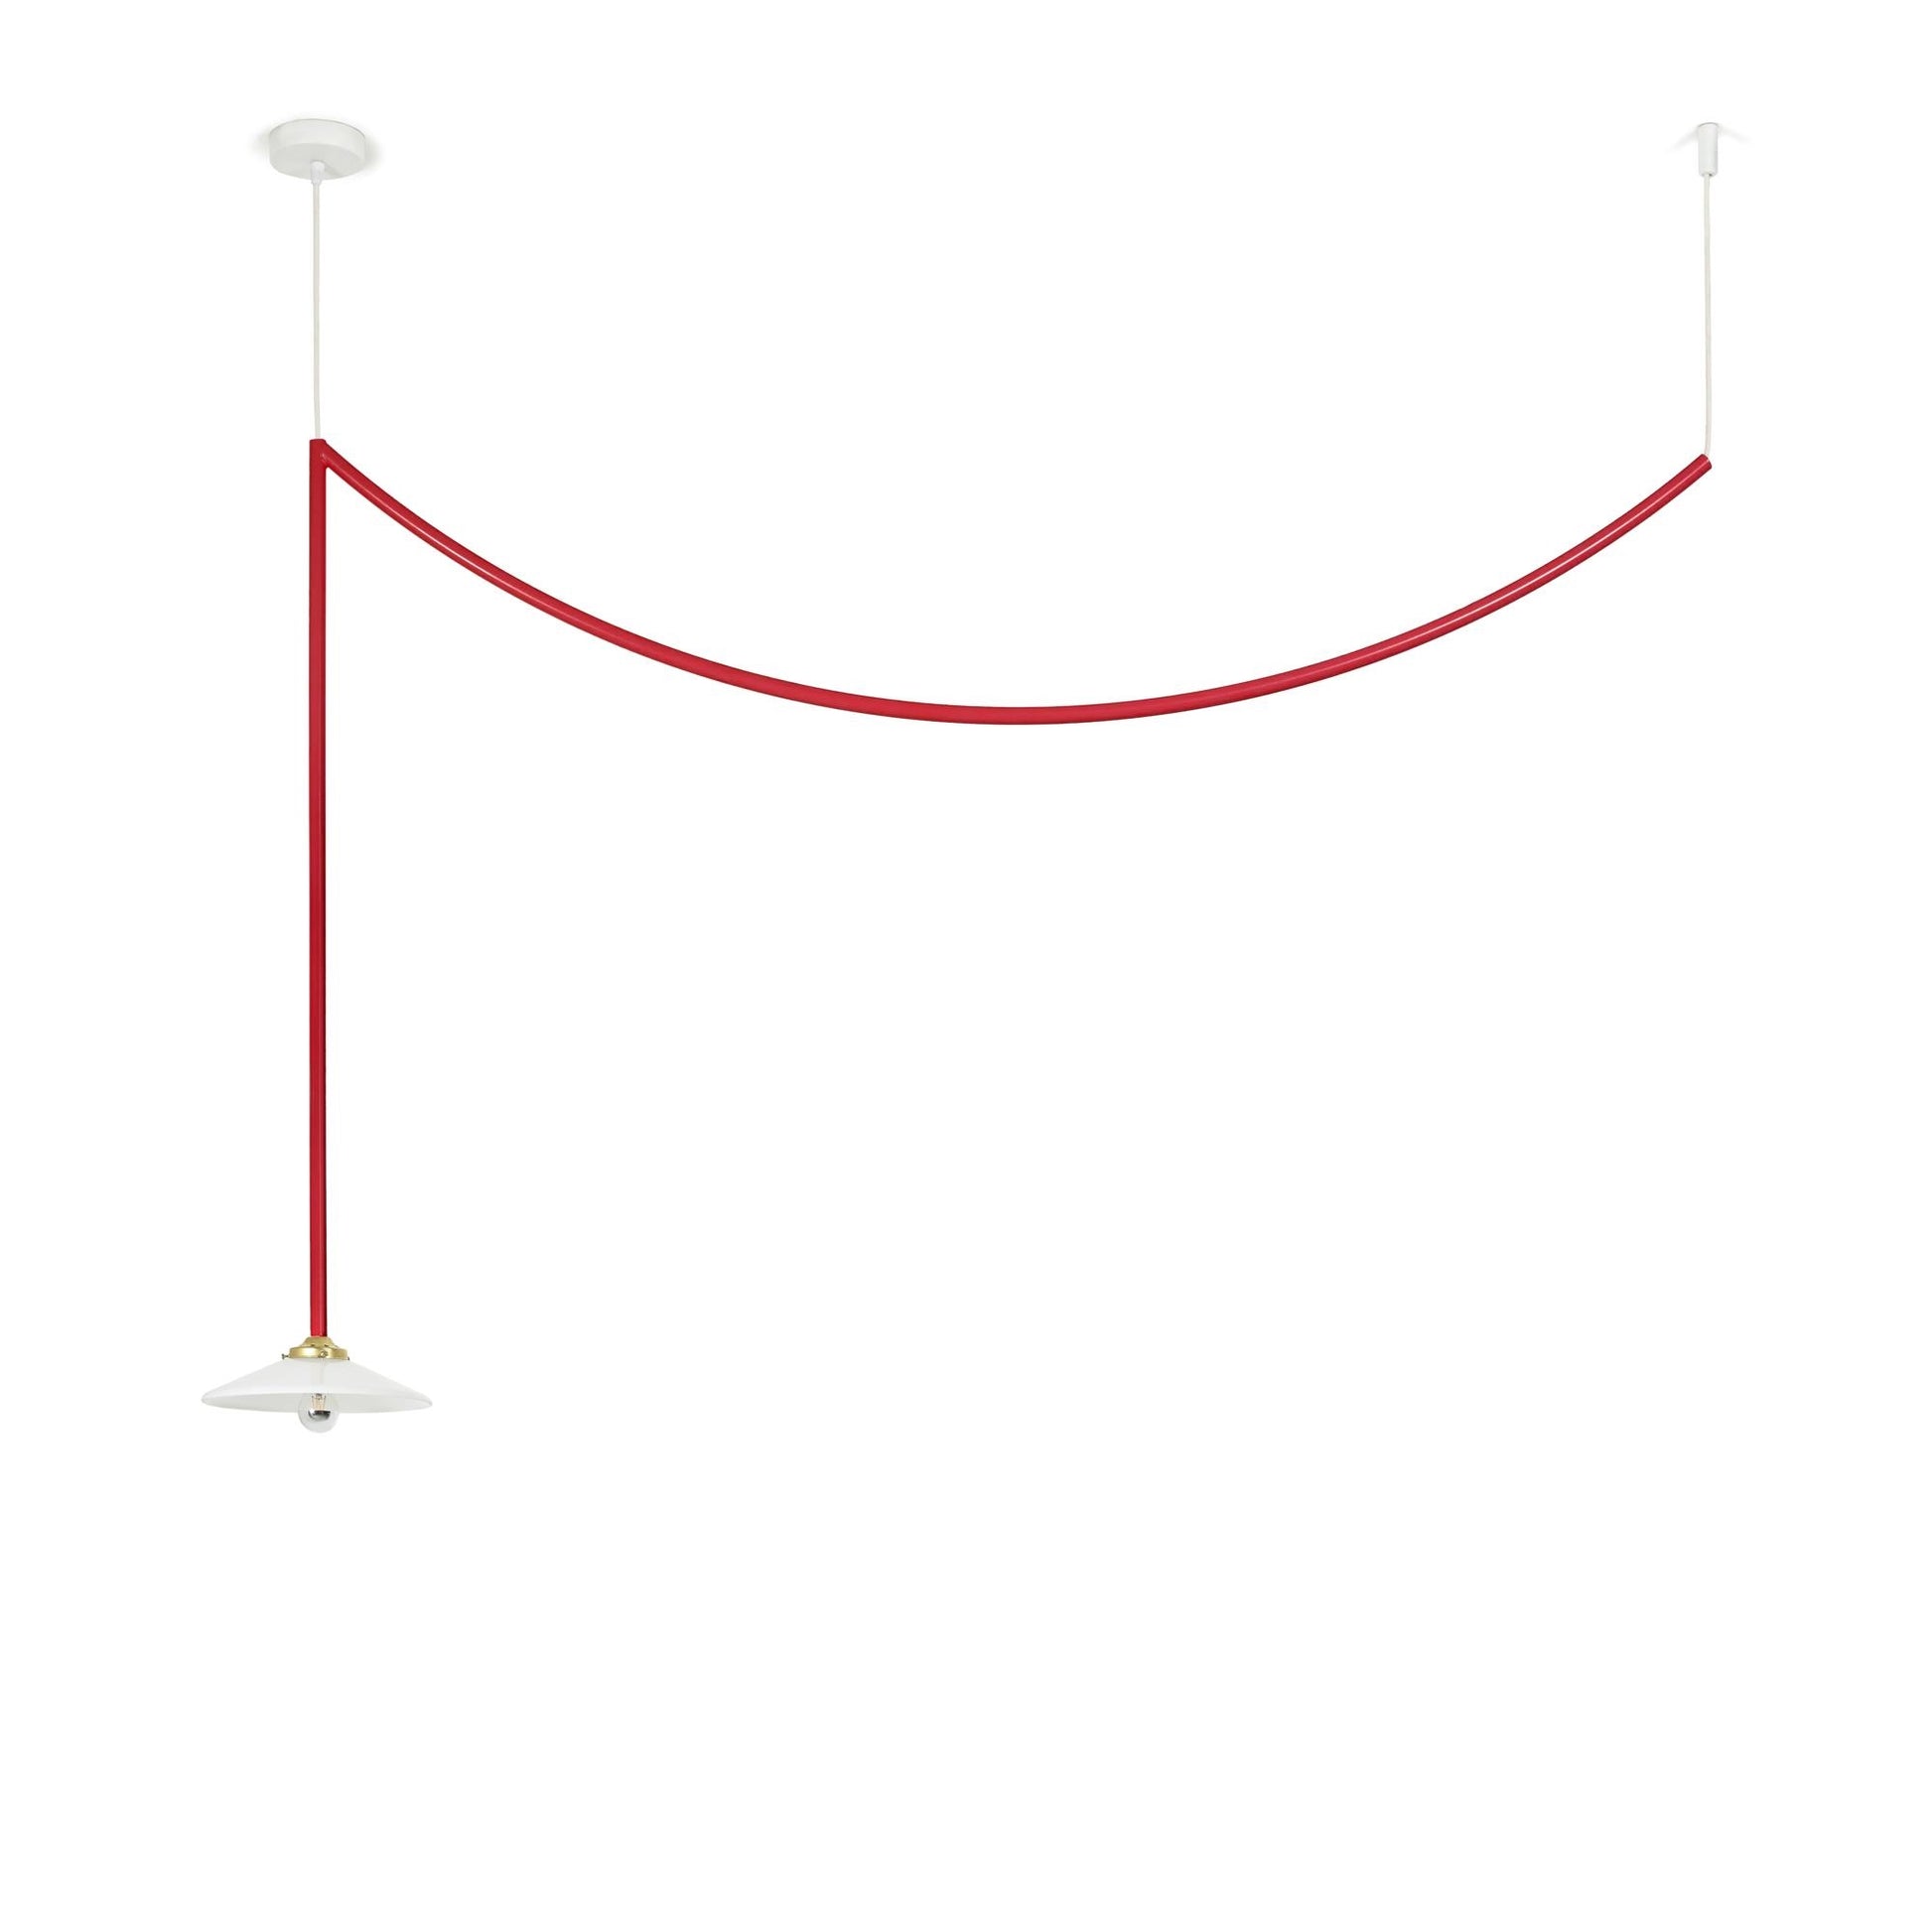 Ceiling Lamp N°4 Ceiling Light by Valerie Objects #Red